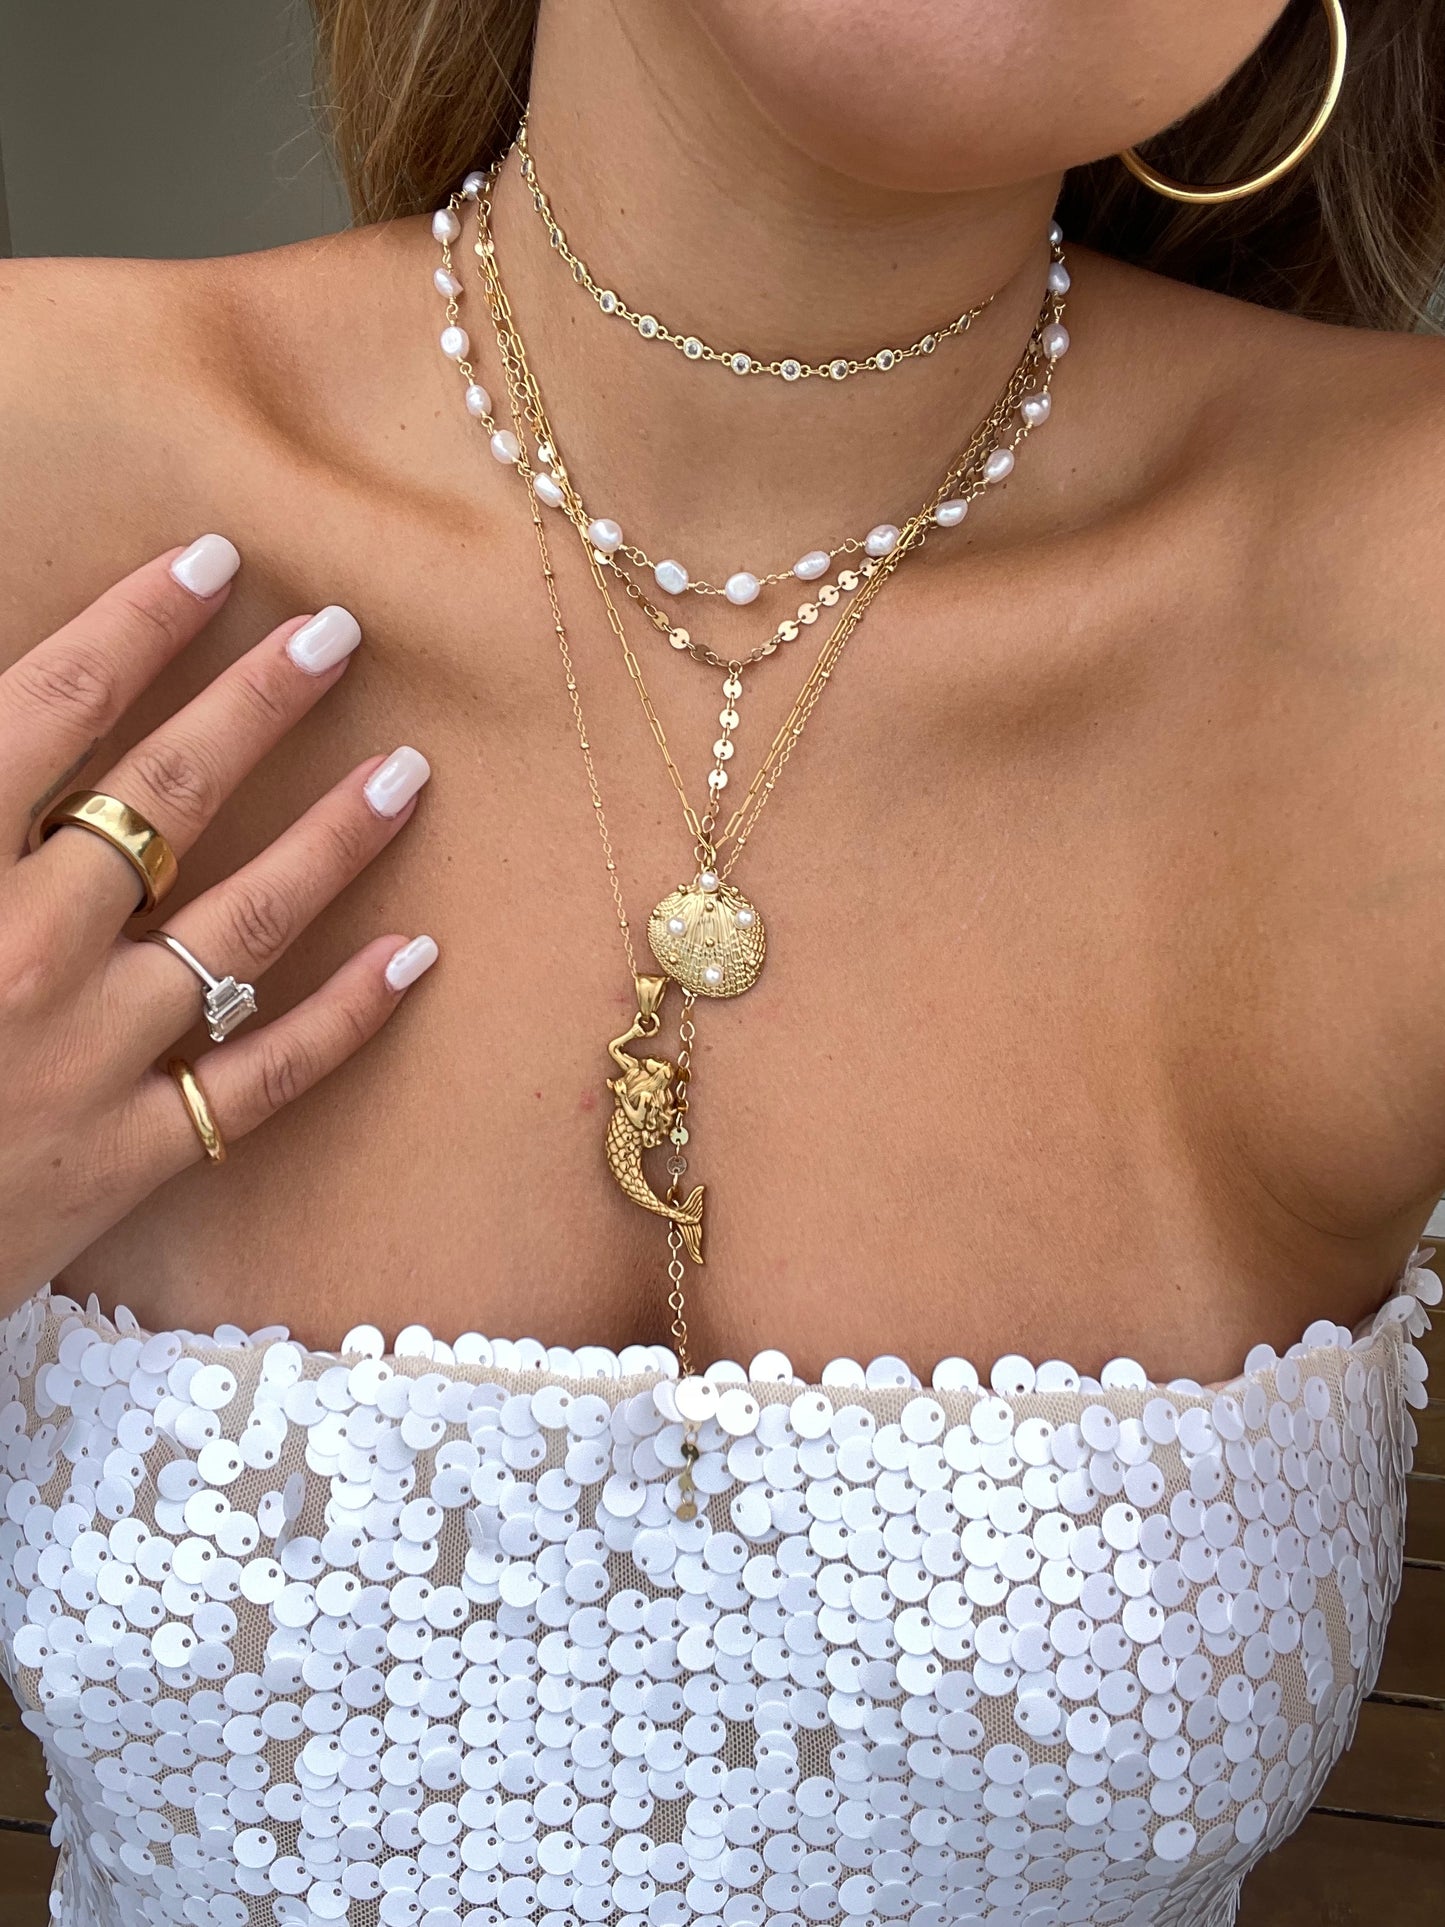 The Mermaid Necklace